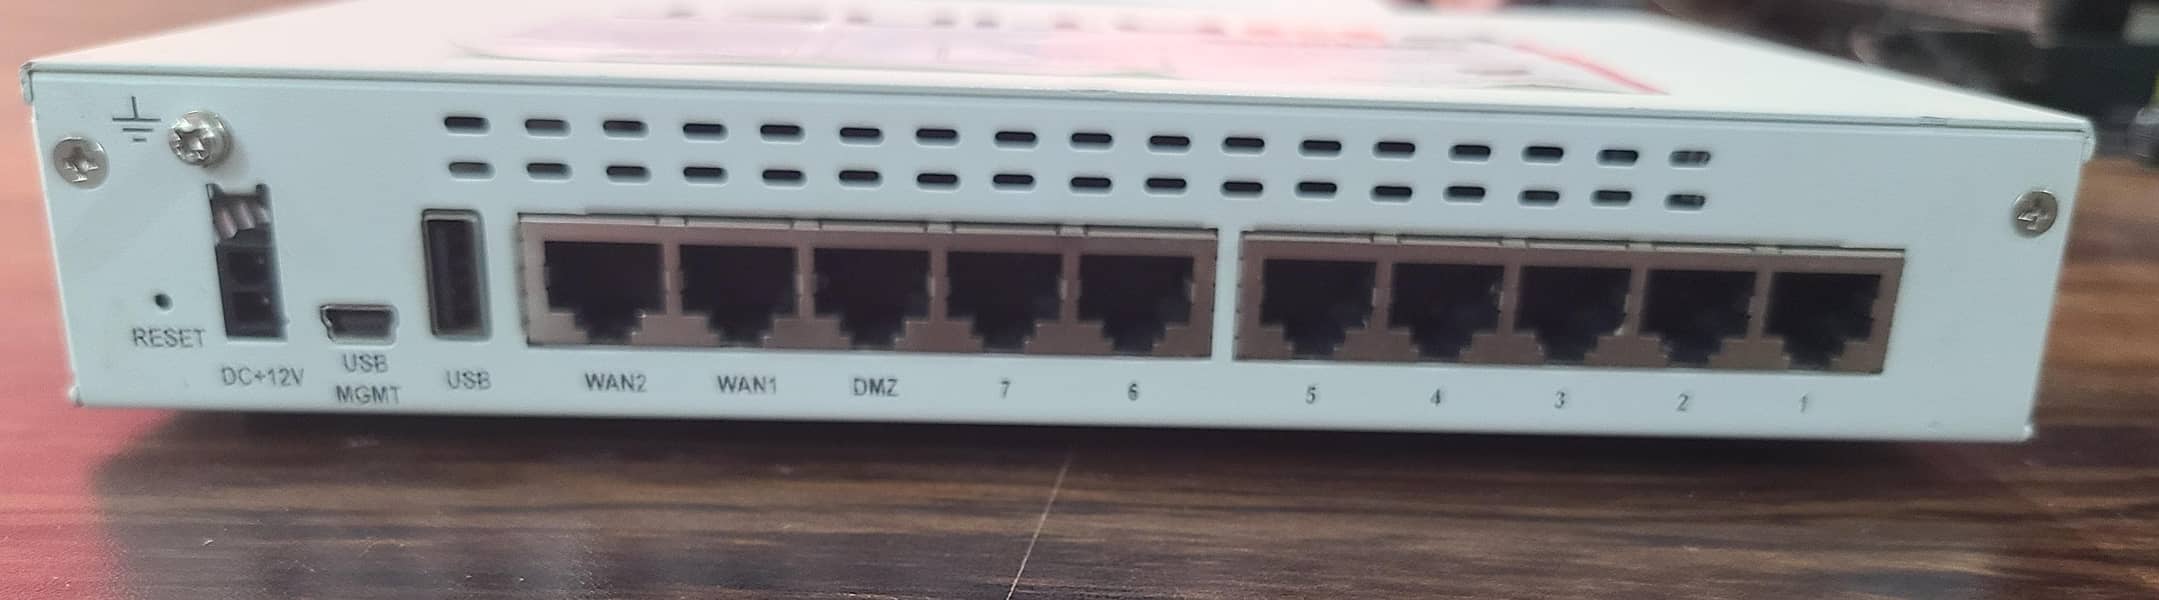 Fortinet/FortiGate-60D/Next/Generation/Firewall/UTM/Appliance (USED) 5